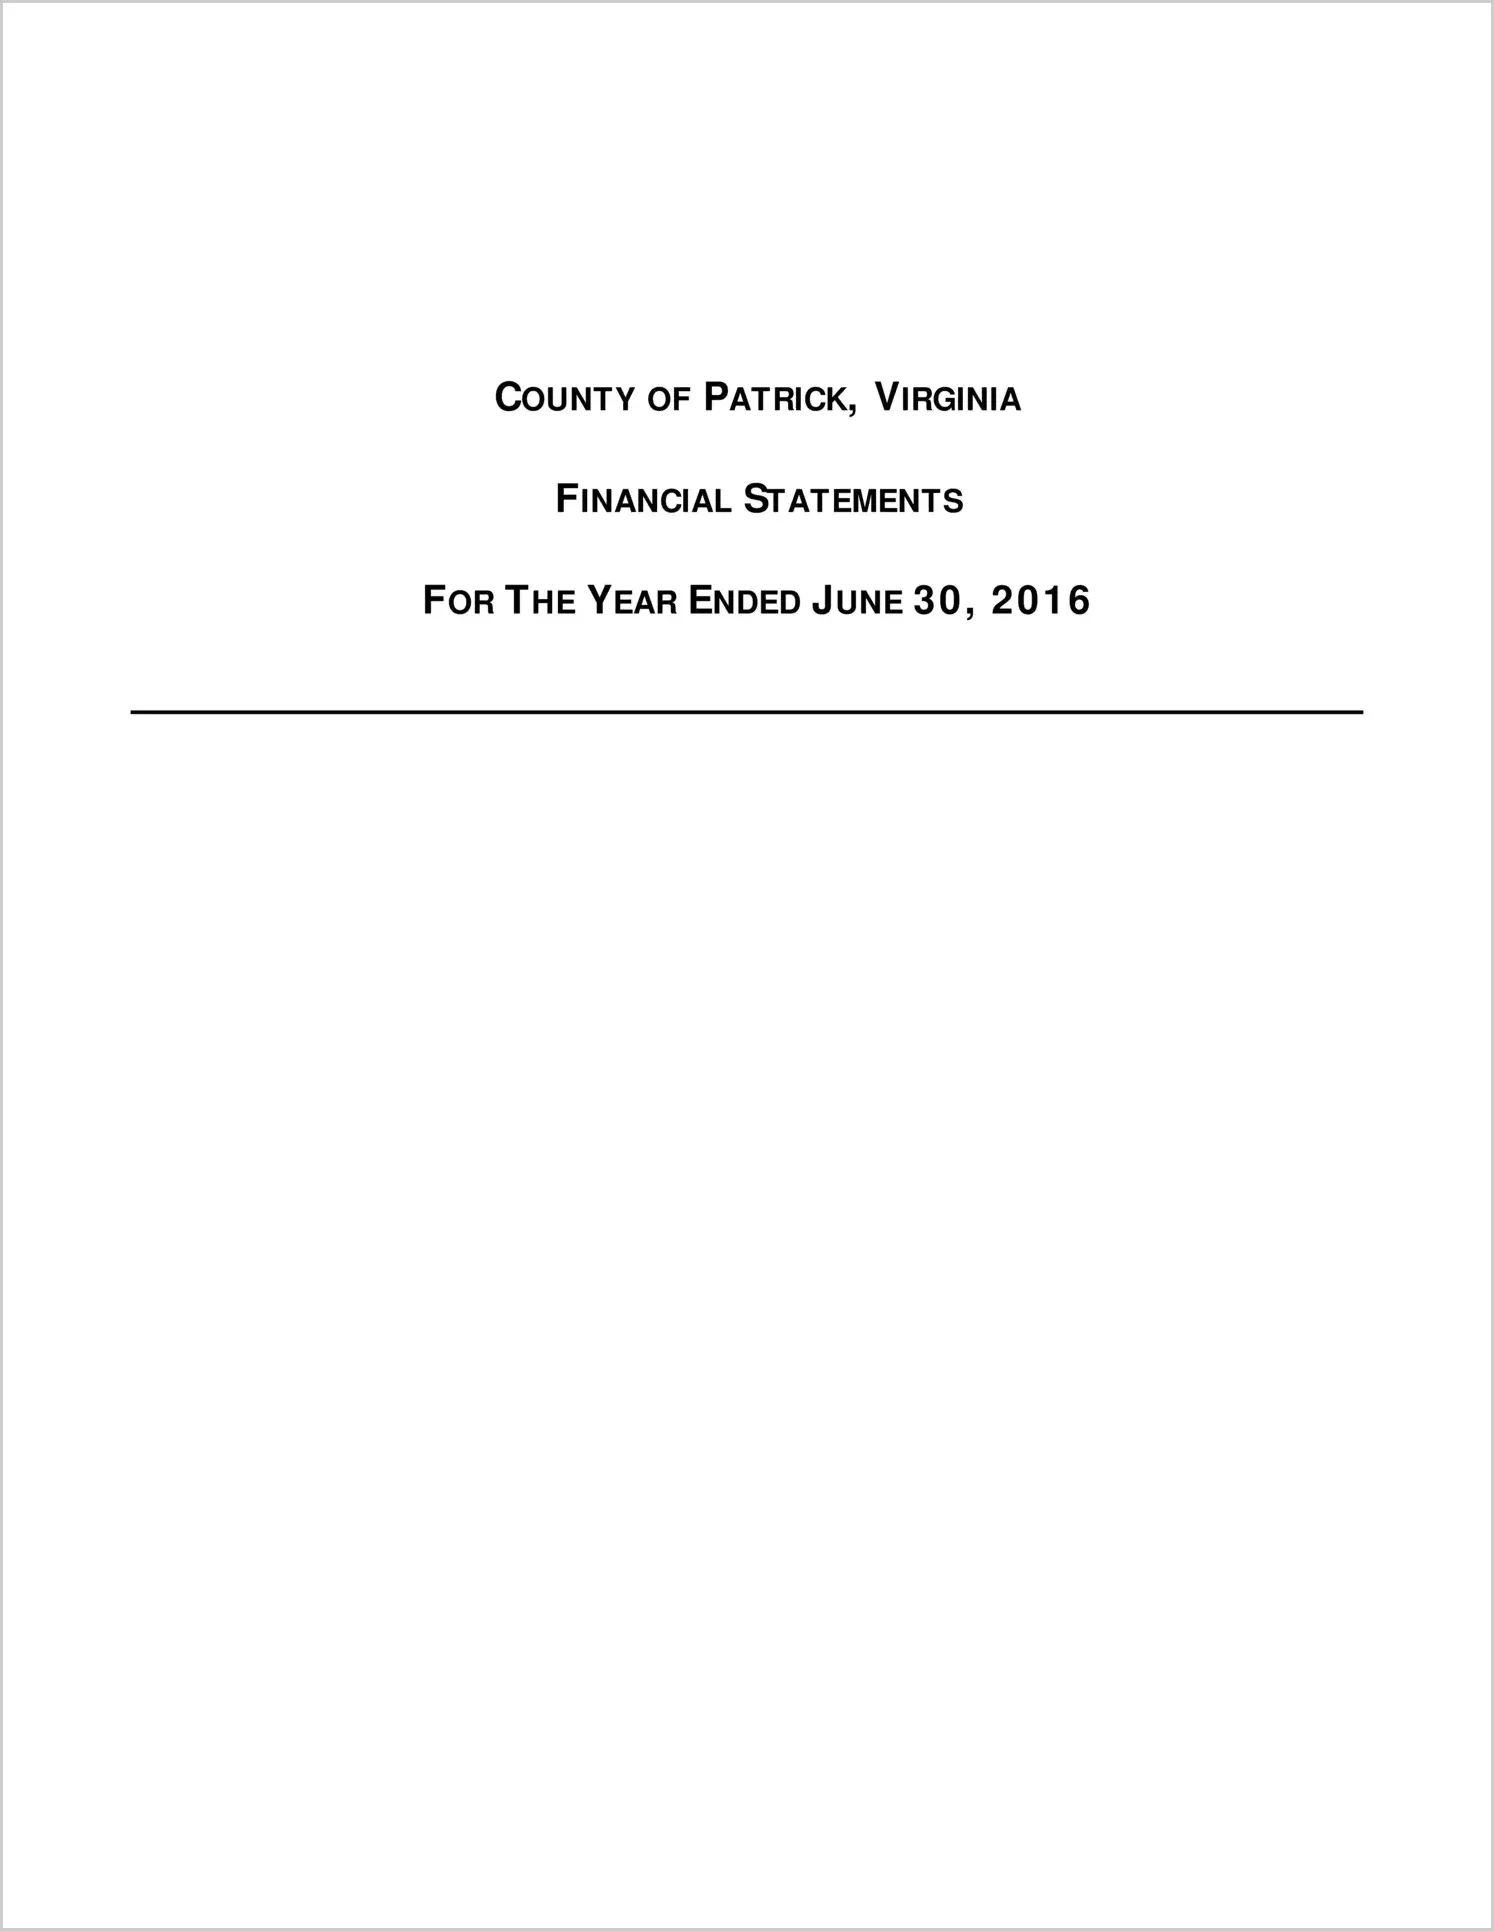 2016 Annual Financial Report for County of Patrick